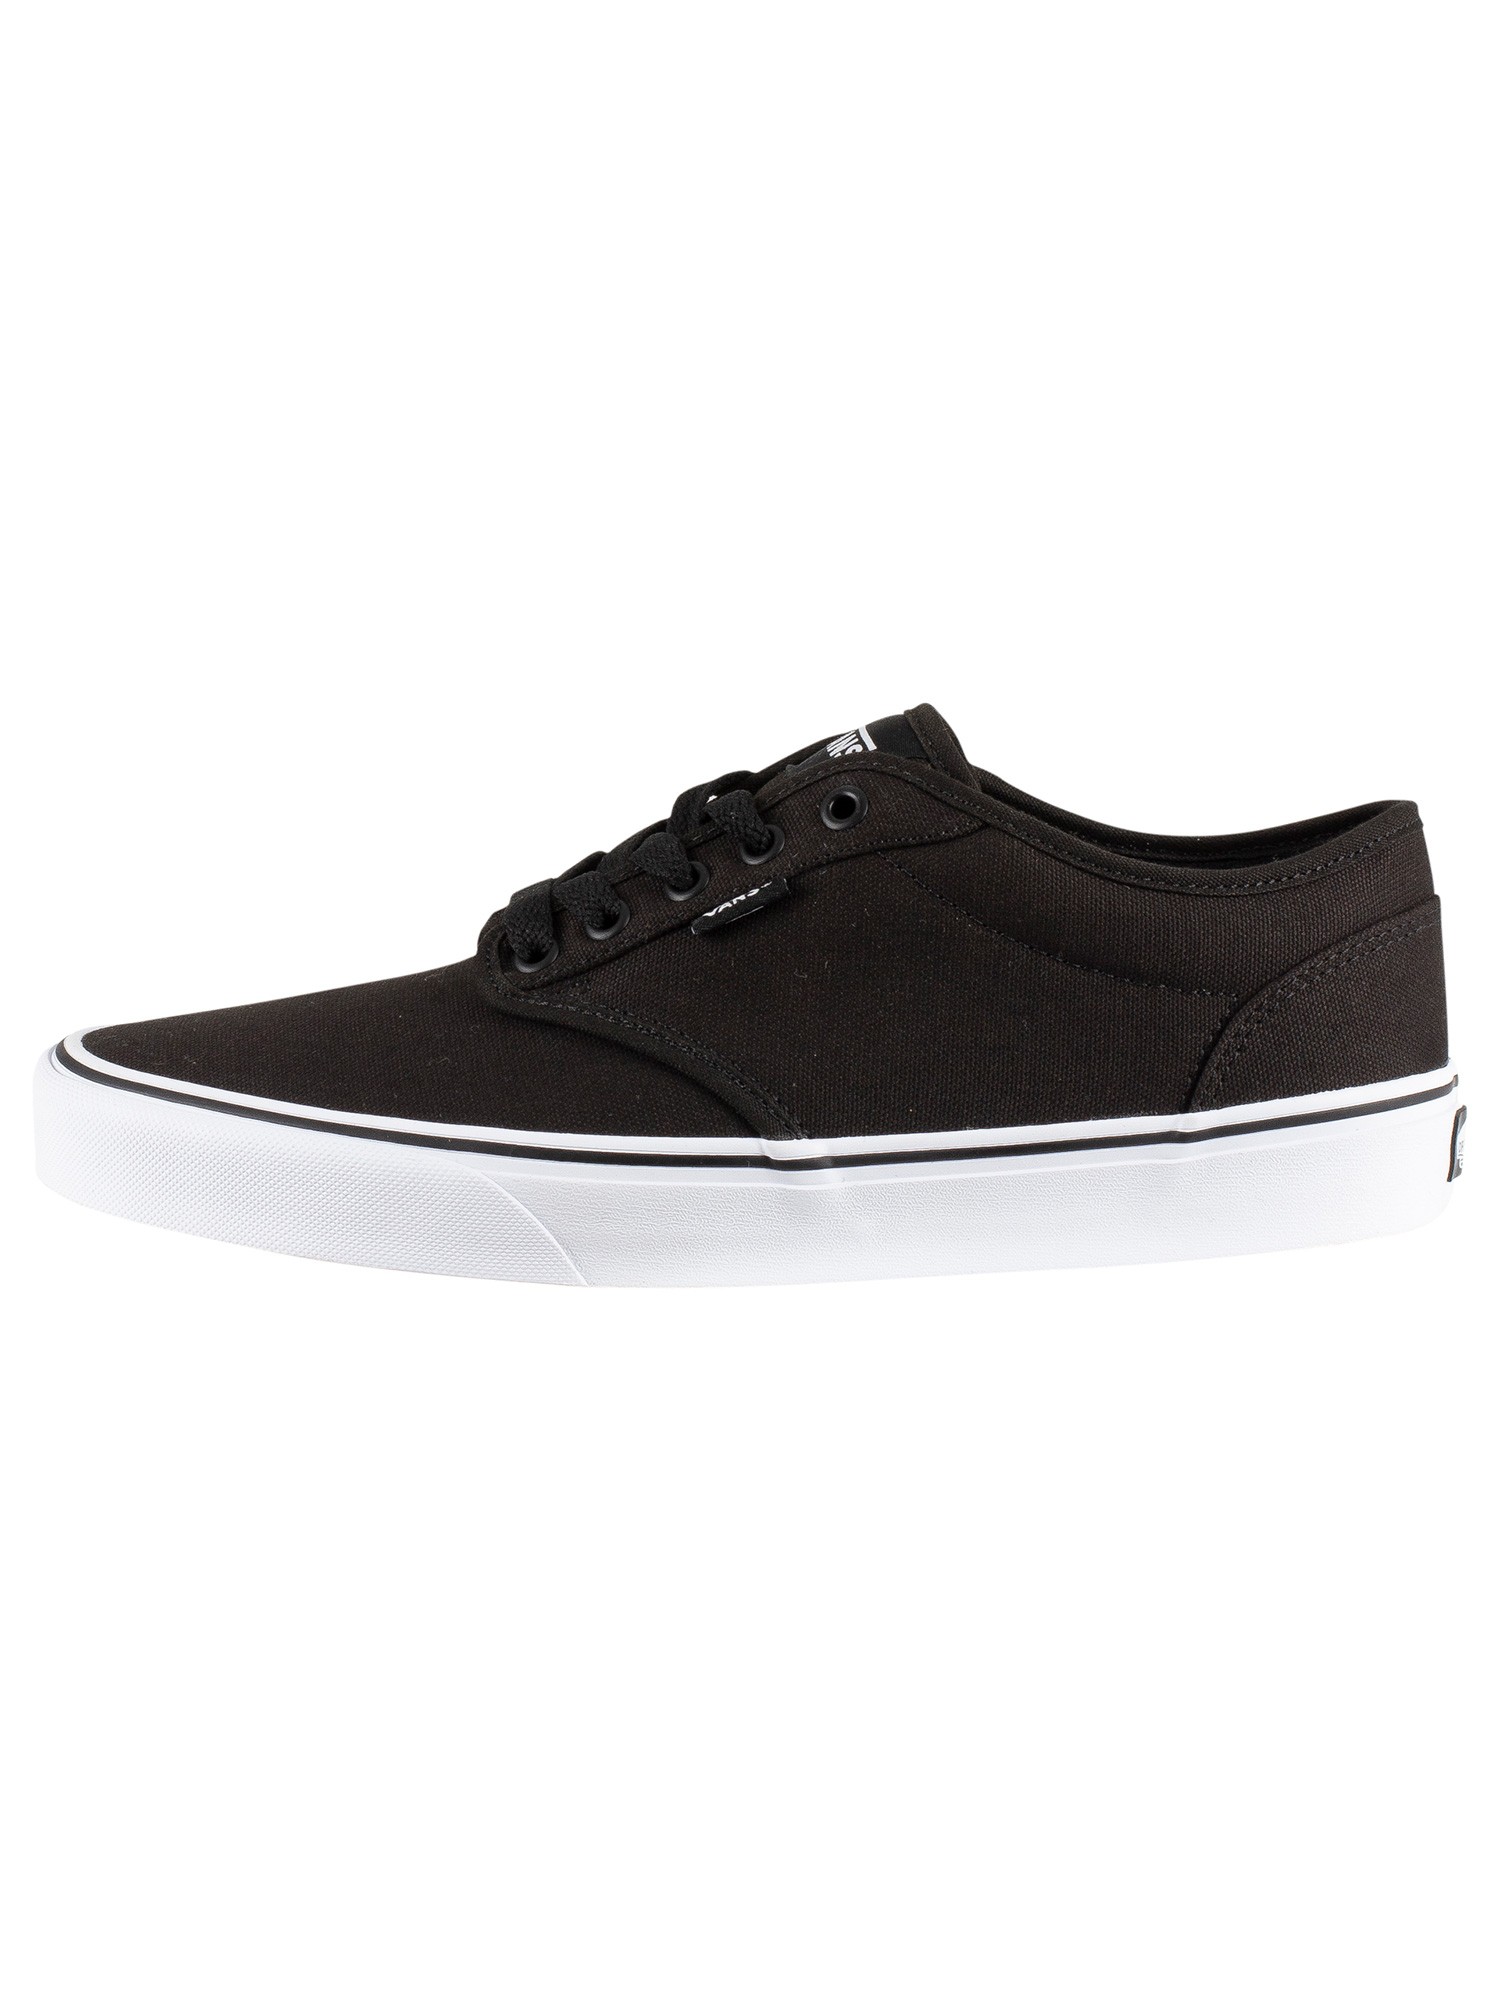 vans atwood for sale